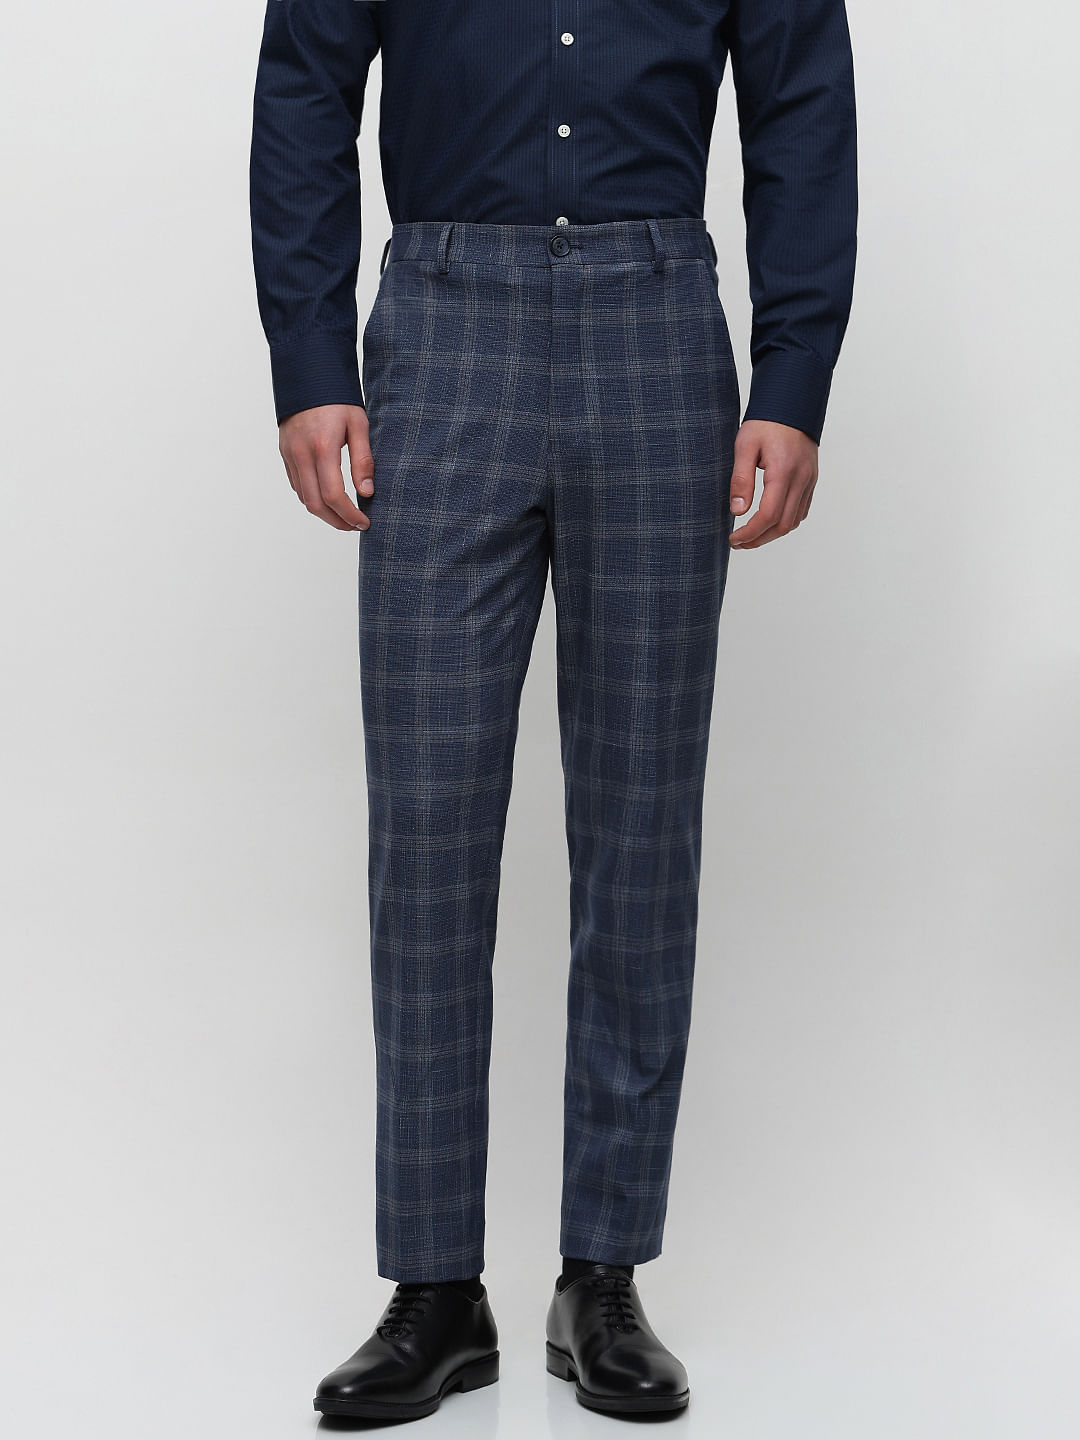 Buy Peter England Men Grey Checked Skinny Fit Formal Trousers - Trousers  for Men 18483756 | Myntra